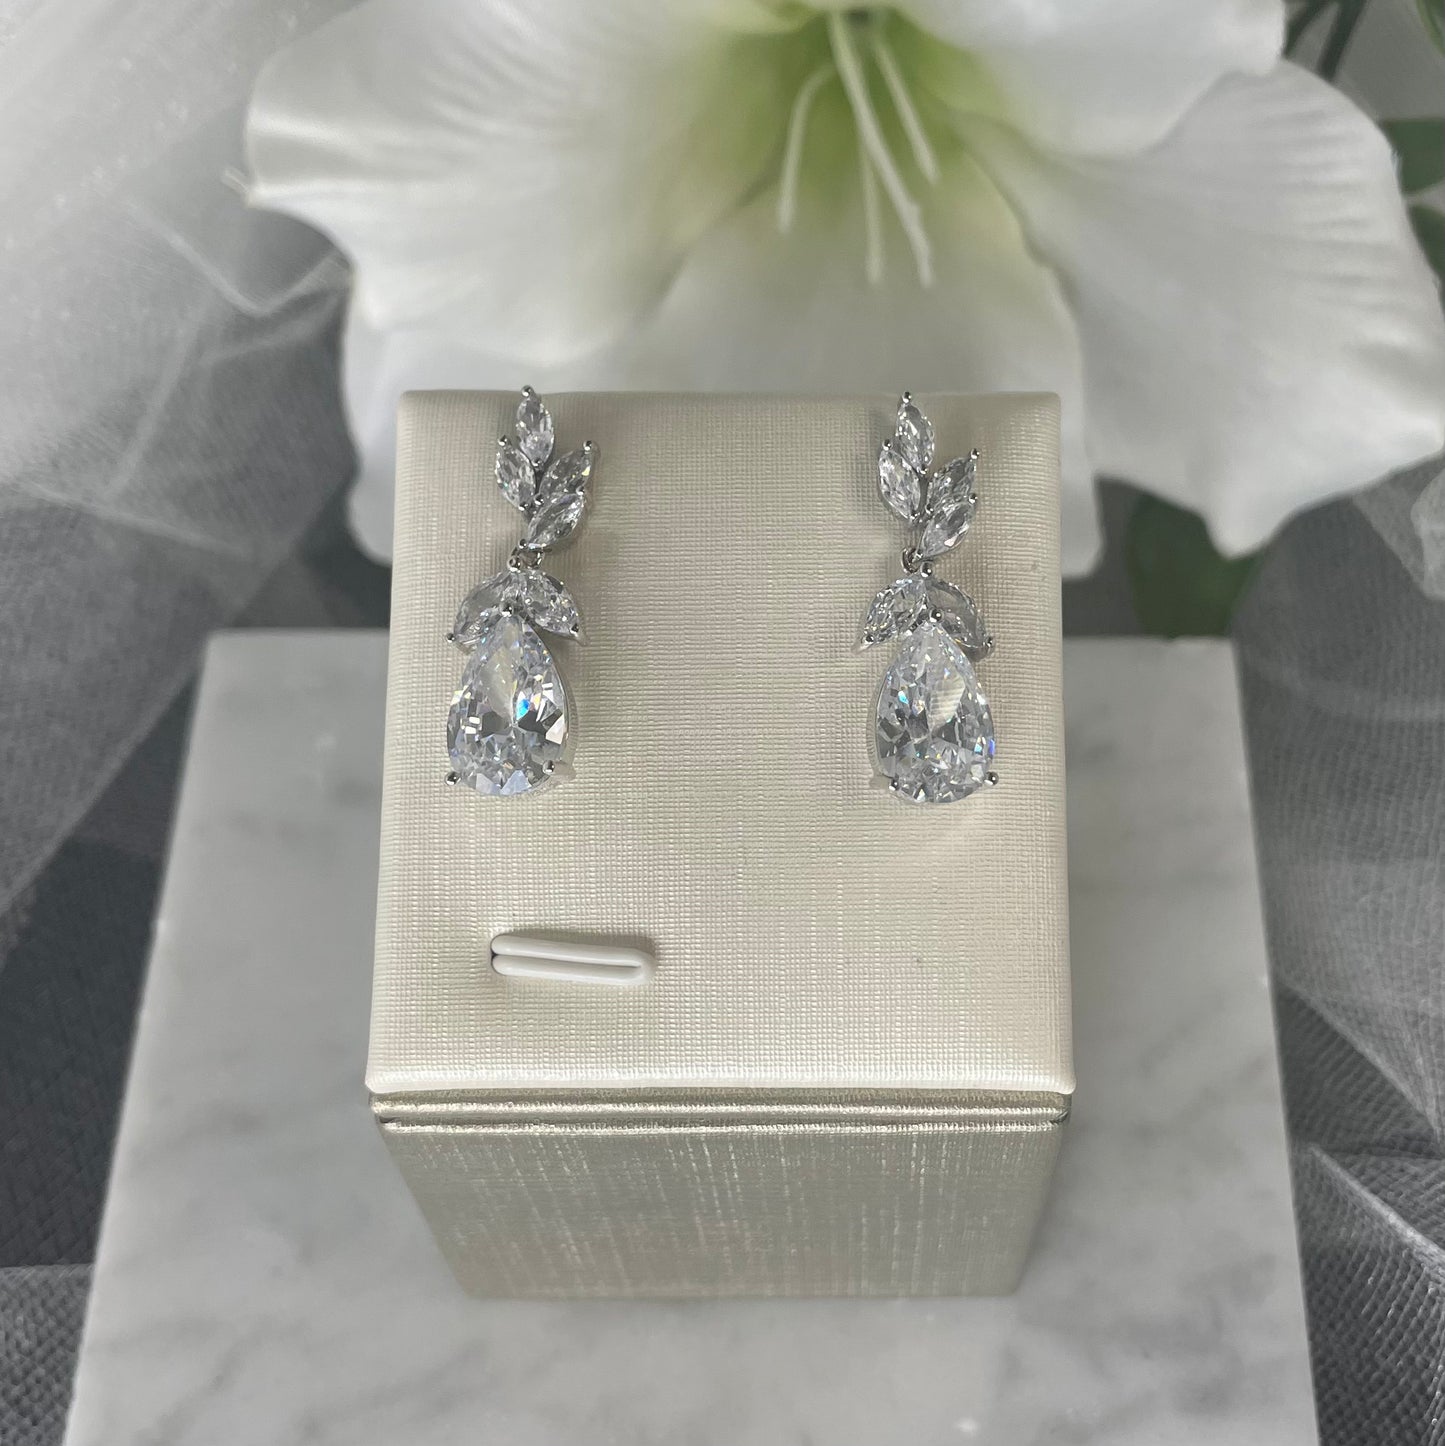 Elegant Maisie Bridal Earrings with Crown-Inspired CZ Drops - Divine Bridal